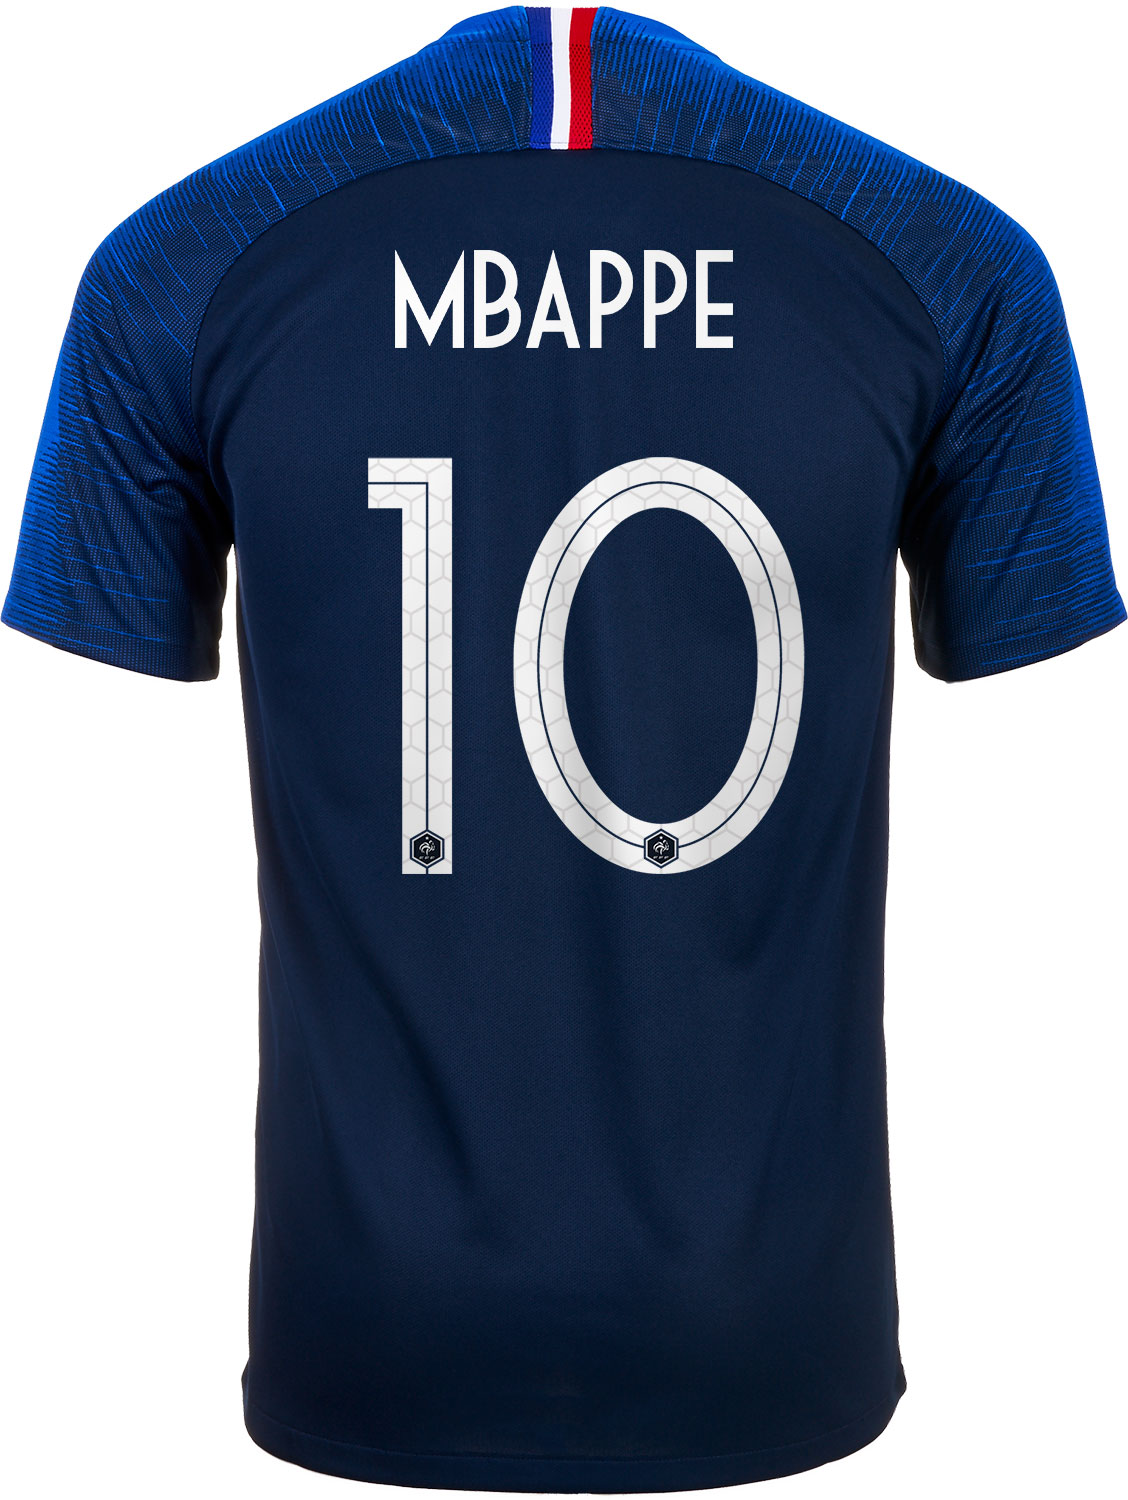 mbappe authentic jersey